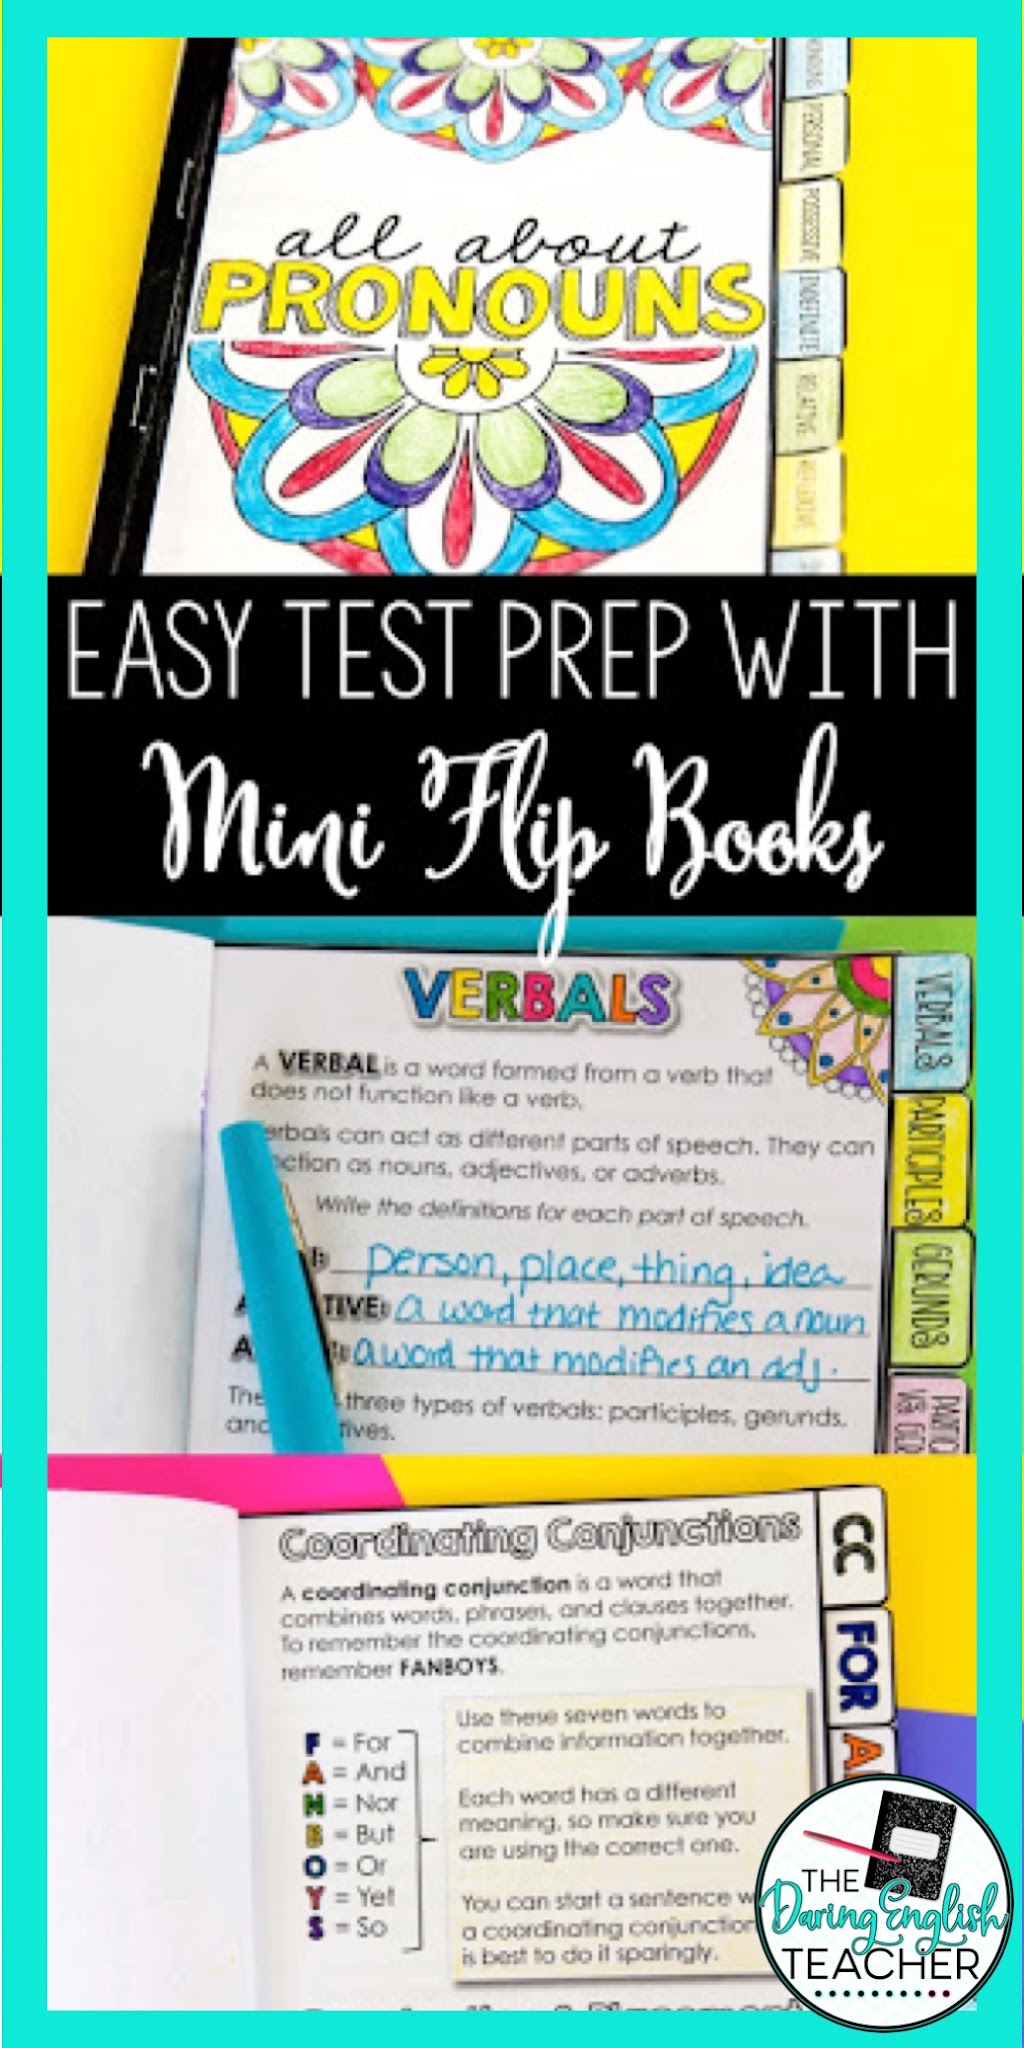 Why I Love Assigning Mini Flip Books: Teaching with mini flip books for easy and engaging test prep activities!